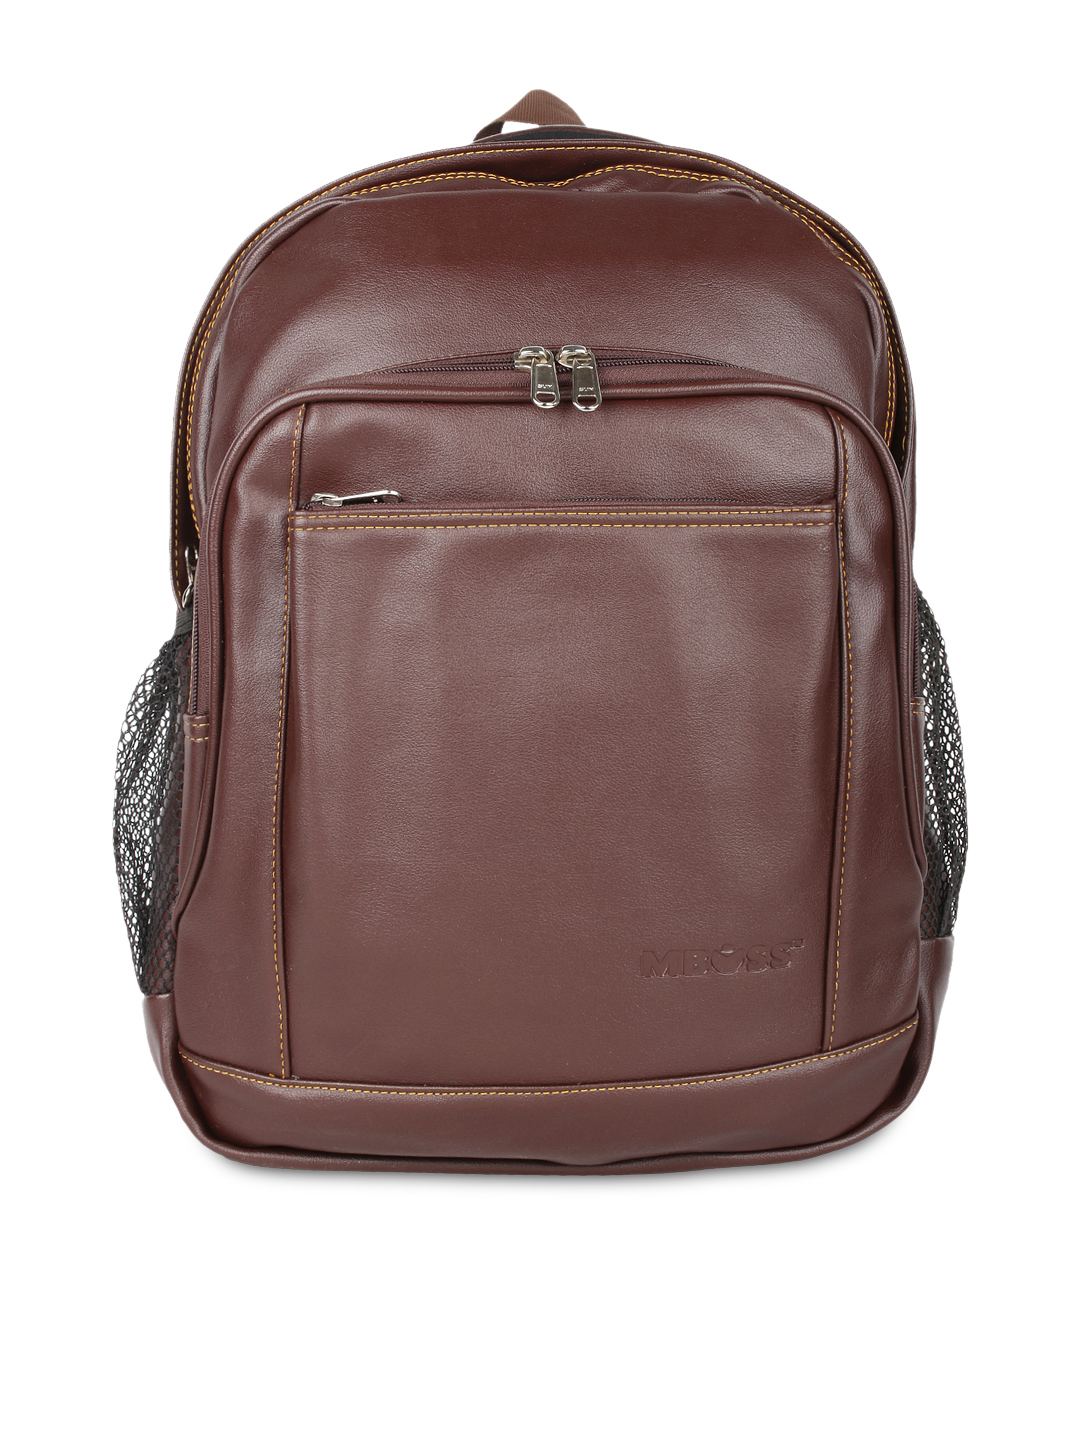 MBOSS Brown Faux Leather Laptop Backpack